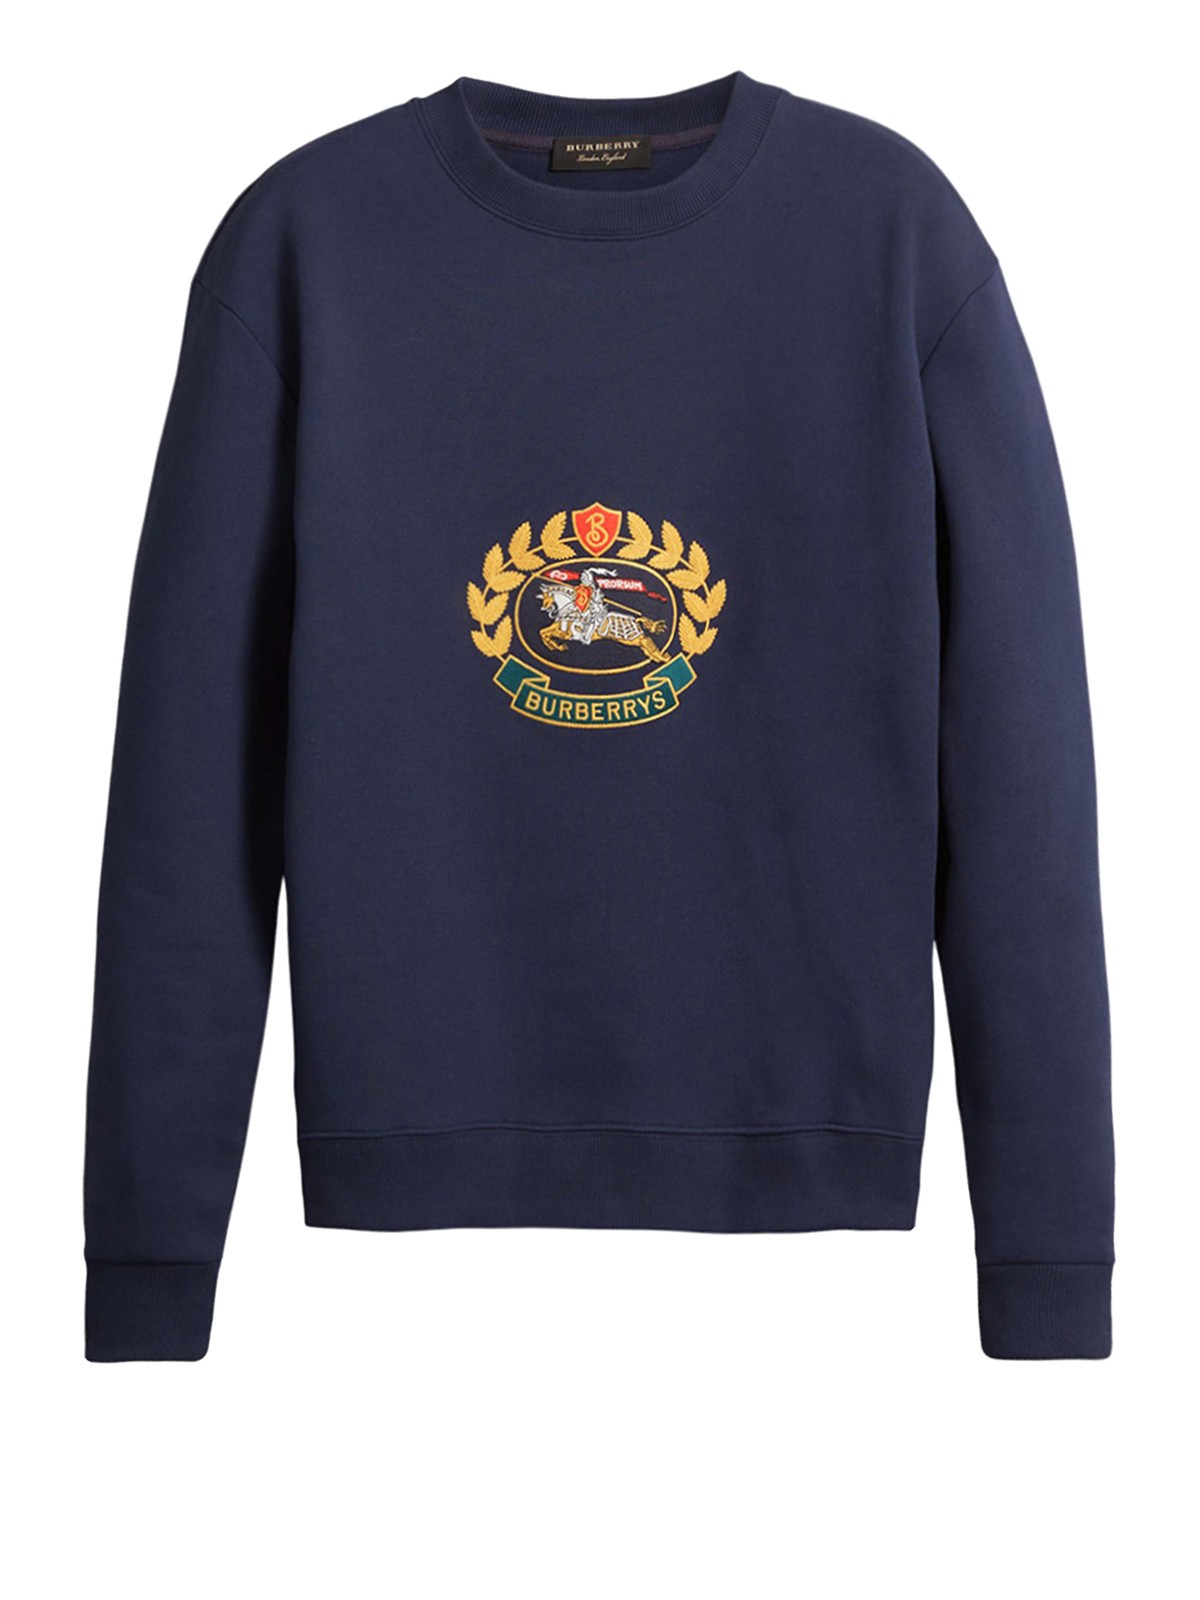 Archive crest embroidery sweatshirt 